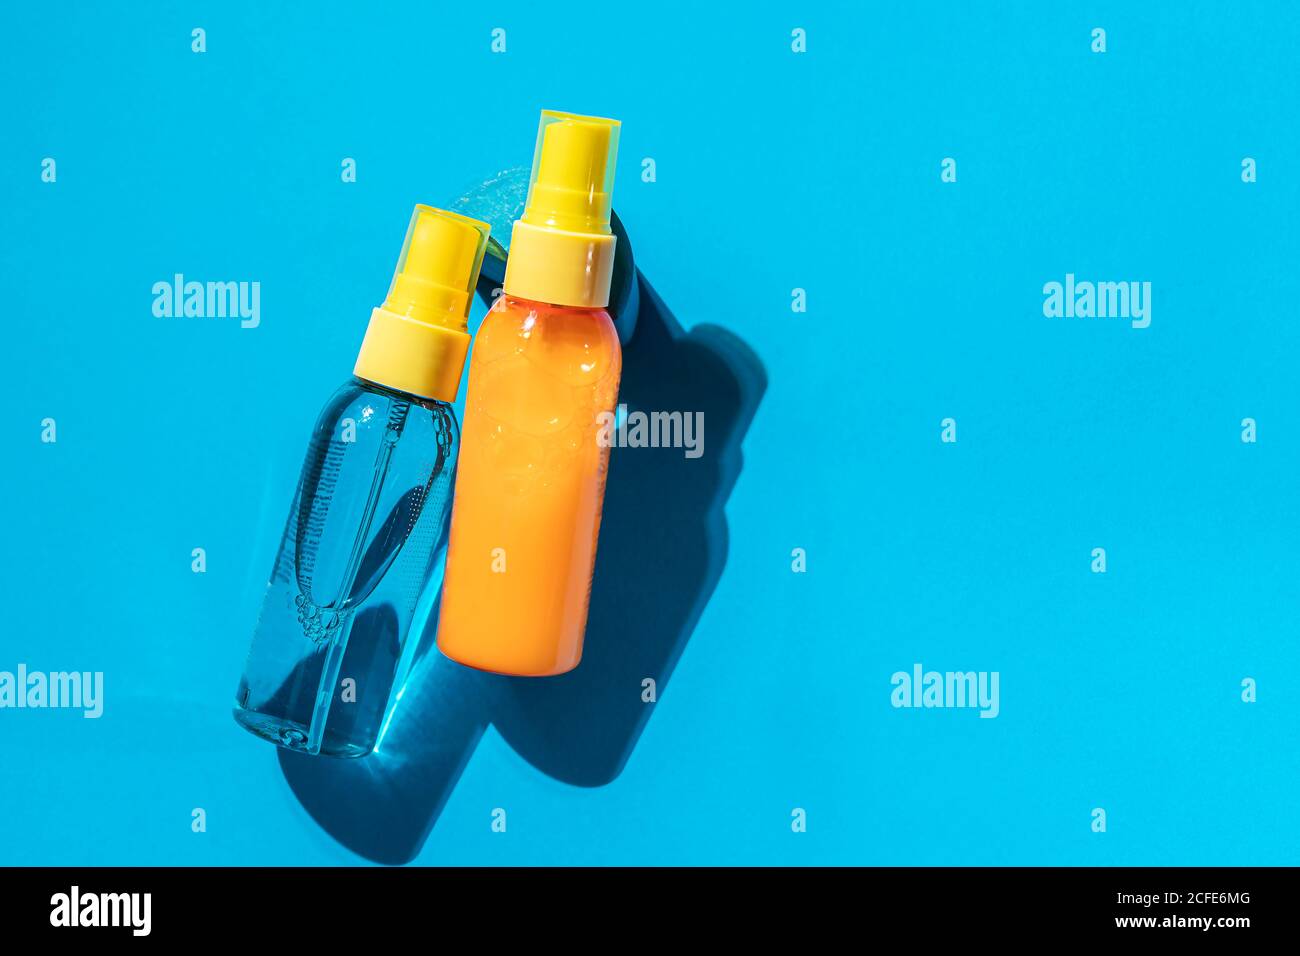 Download Mist Spray Bottle High Resolution Stock Photography And Images Alamy PSD Mockup Templates